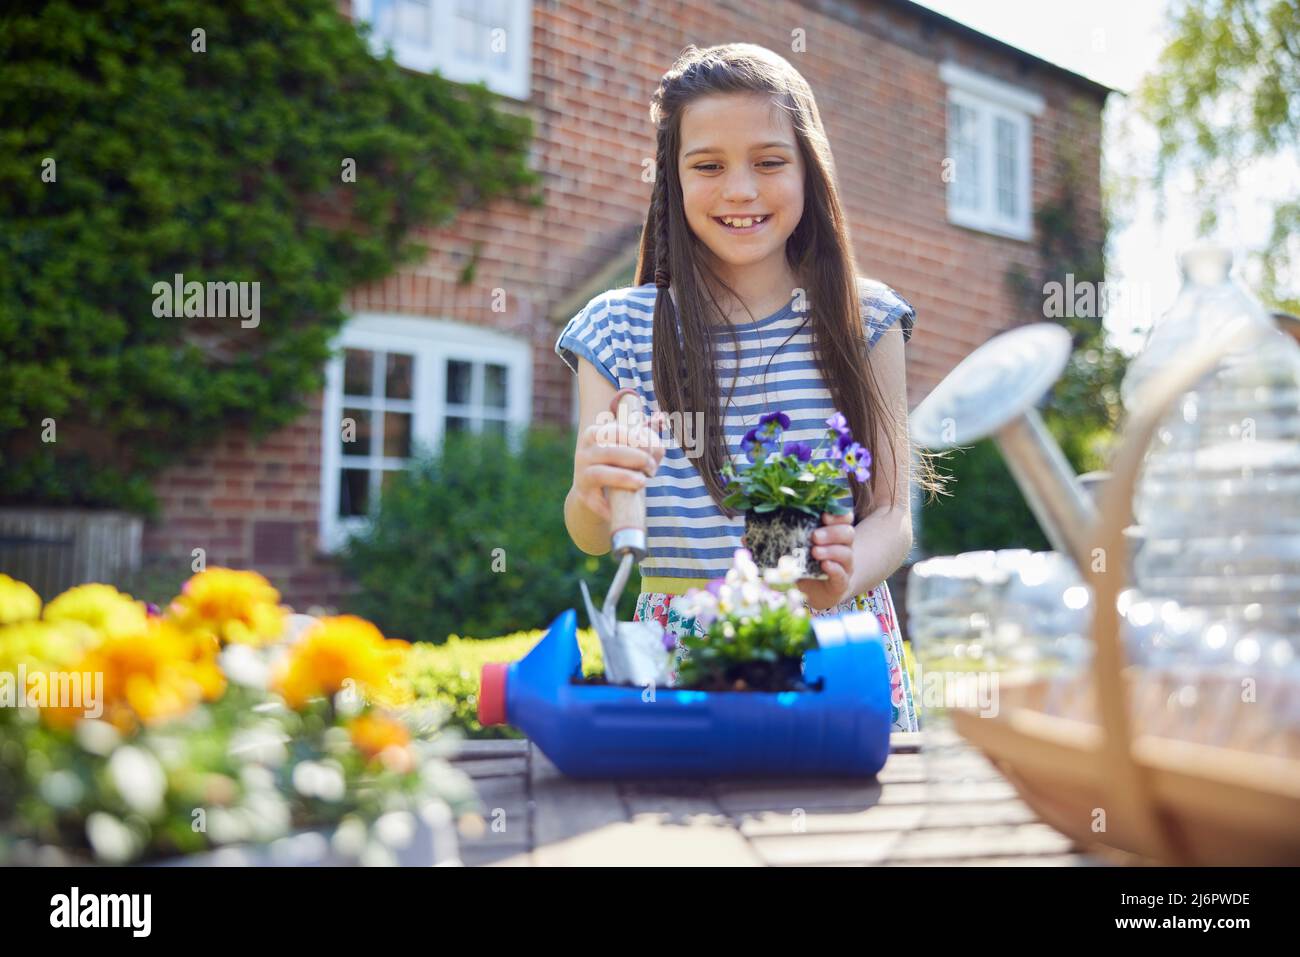 Smiling Girl Making Recycled Plant Holder From Plastic Bottle Packaging Waste In Garden At Home Stock Photo